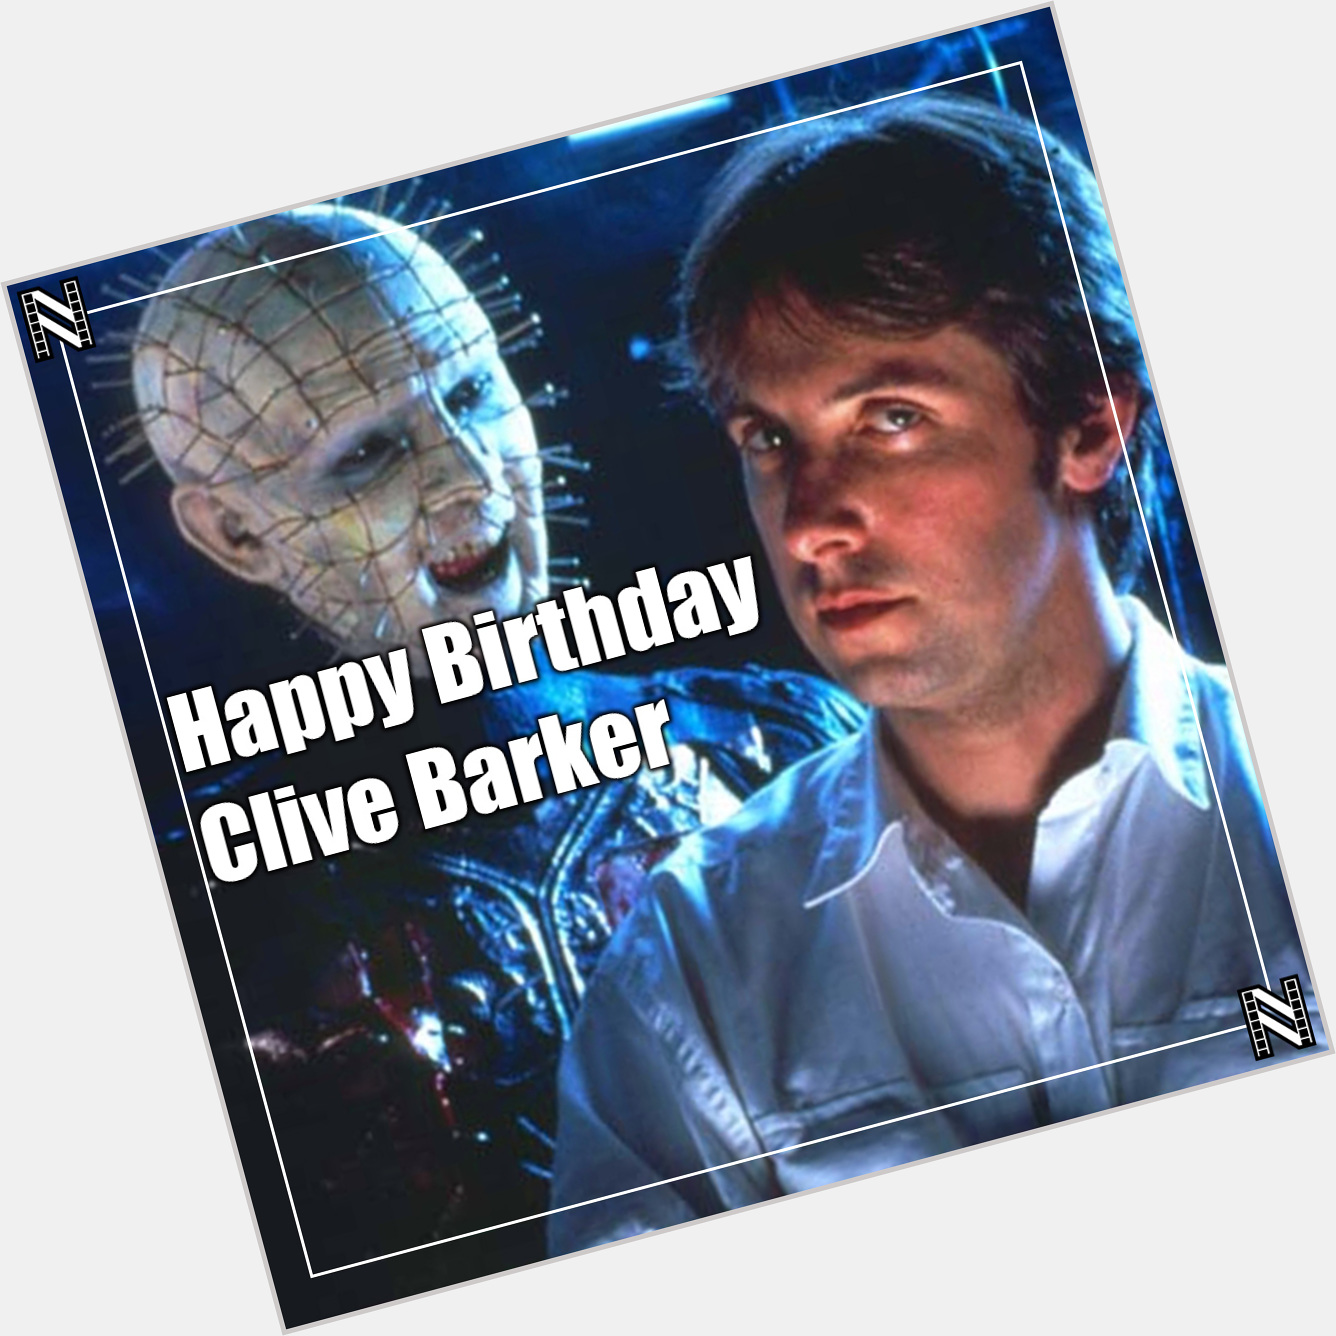 Born on this day Oct 5th - Happy birthday to Clive Barker! 